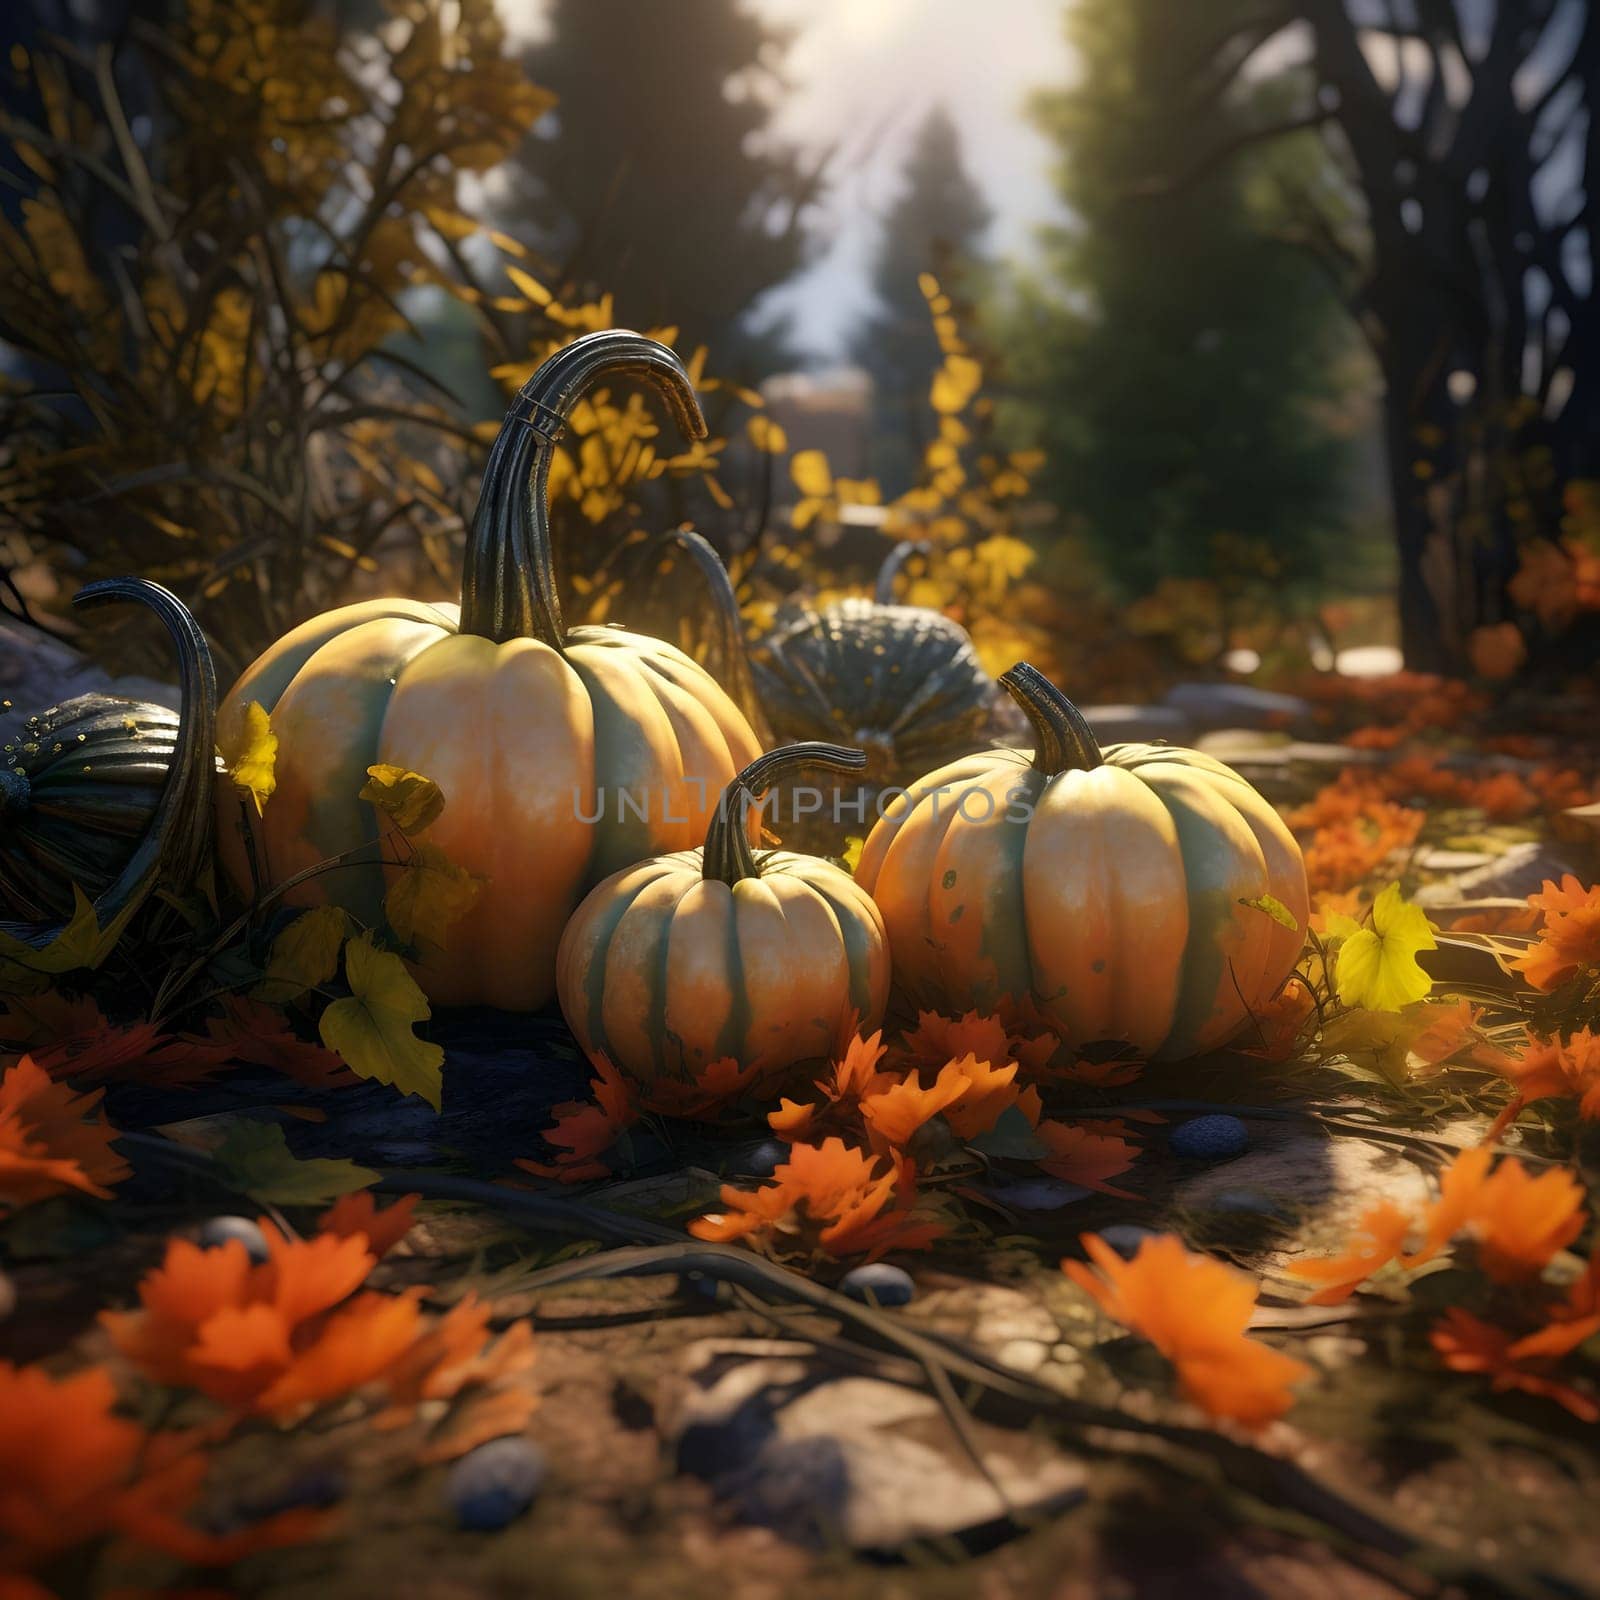 Three pumpkins in the park around autumn leaves autumn climate. Pumpkin as a dish of thanksgiving for the harvest. by ThemesS